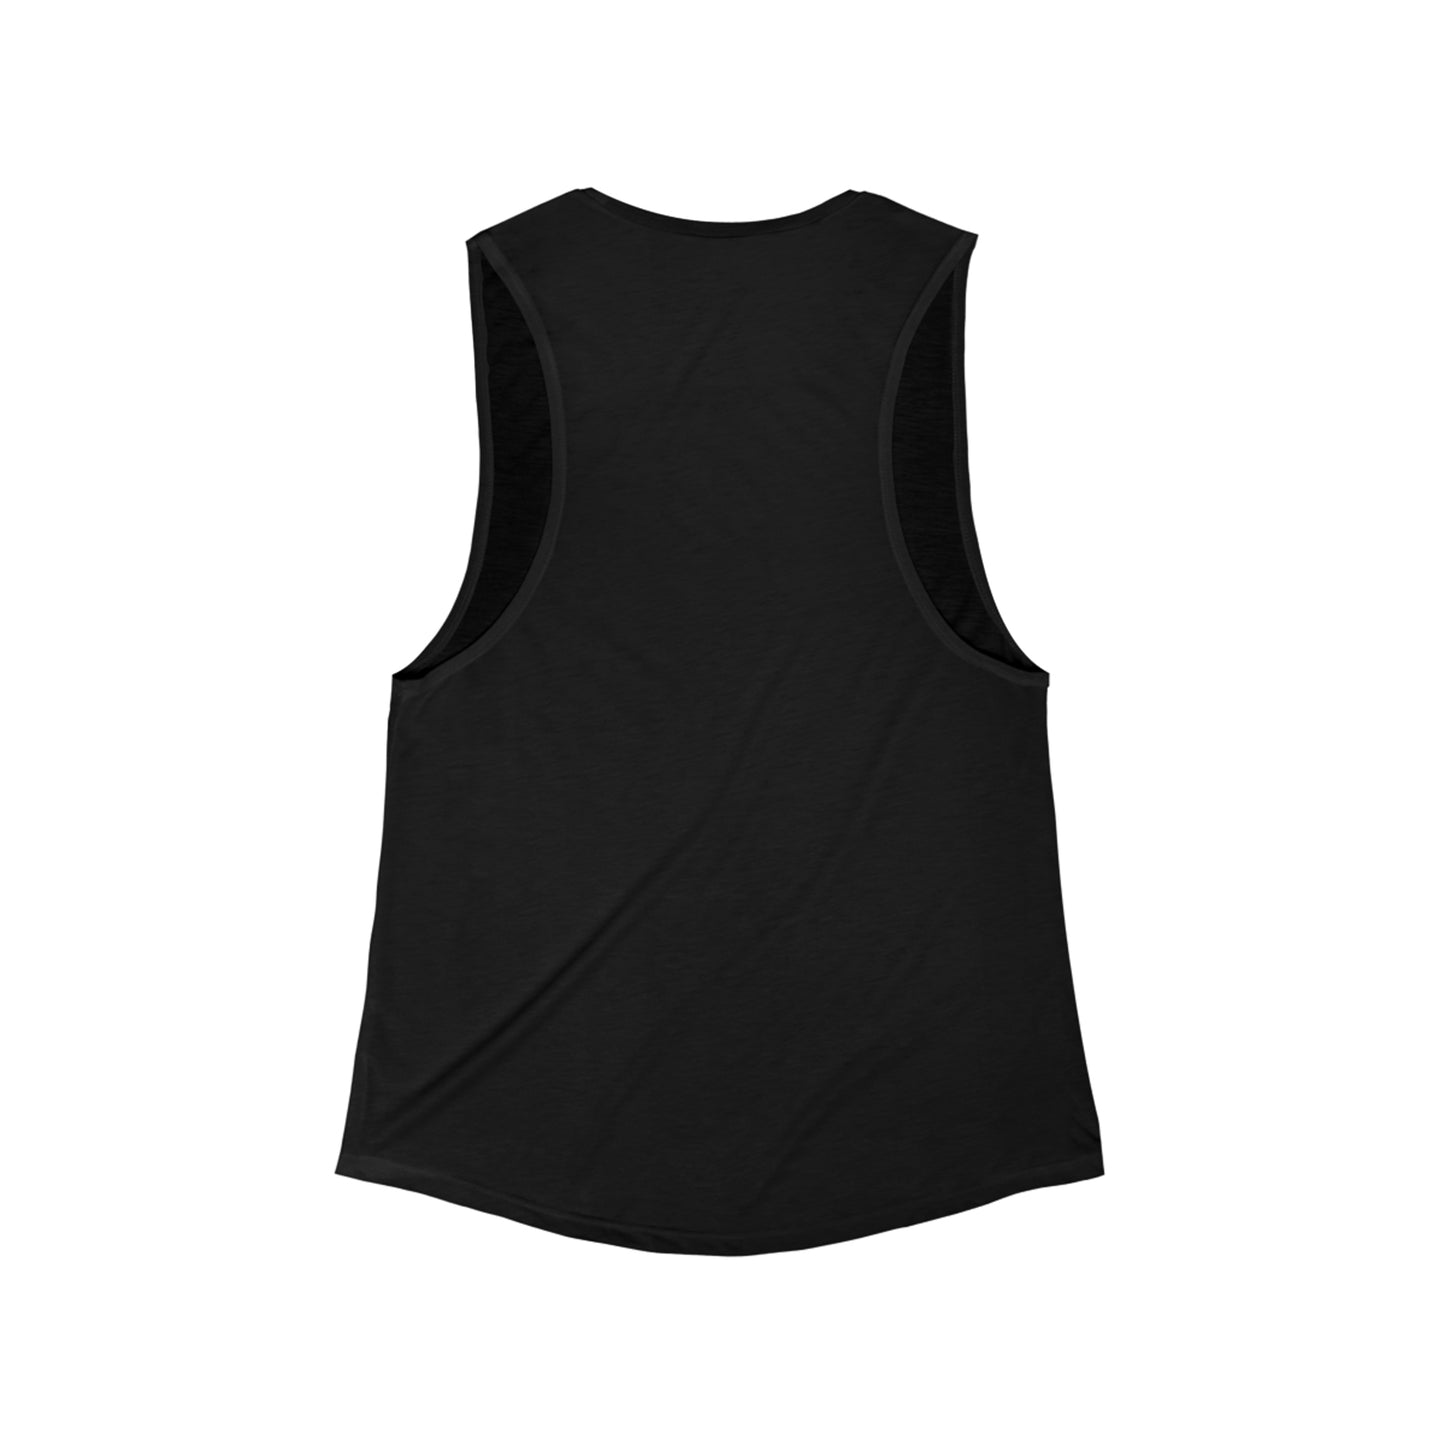 Some Animals Are More Equal Than Others Women's Flowy Scoop Muscle Tank